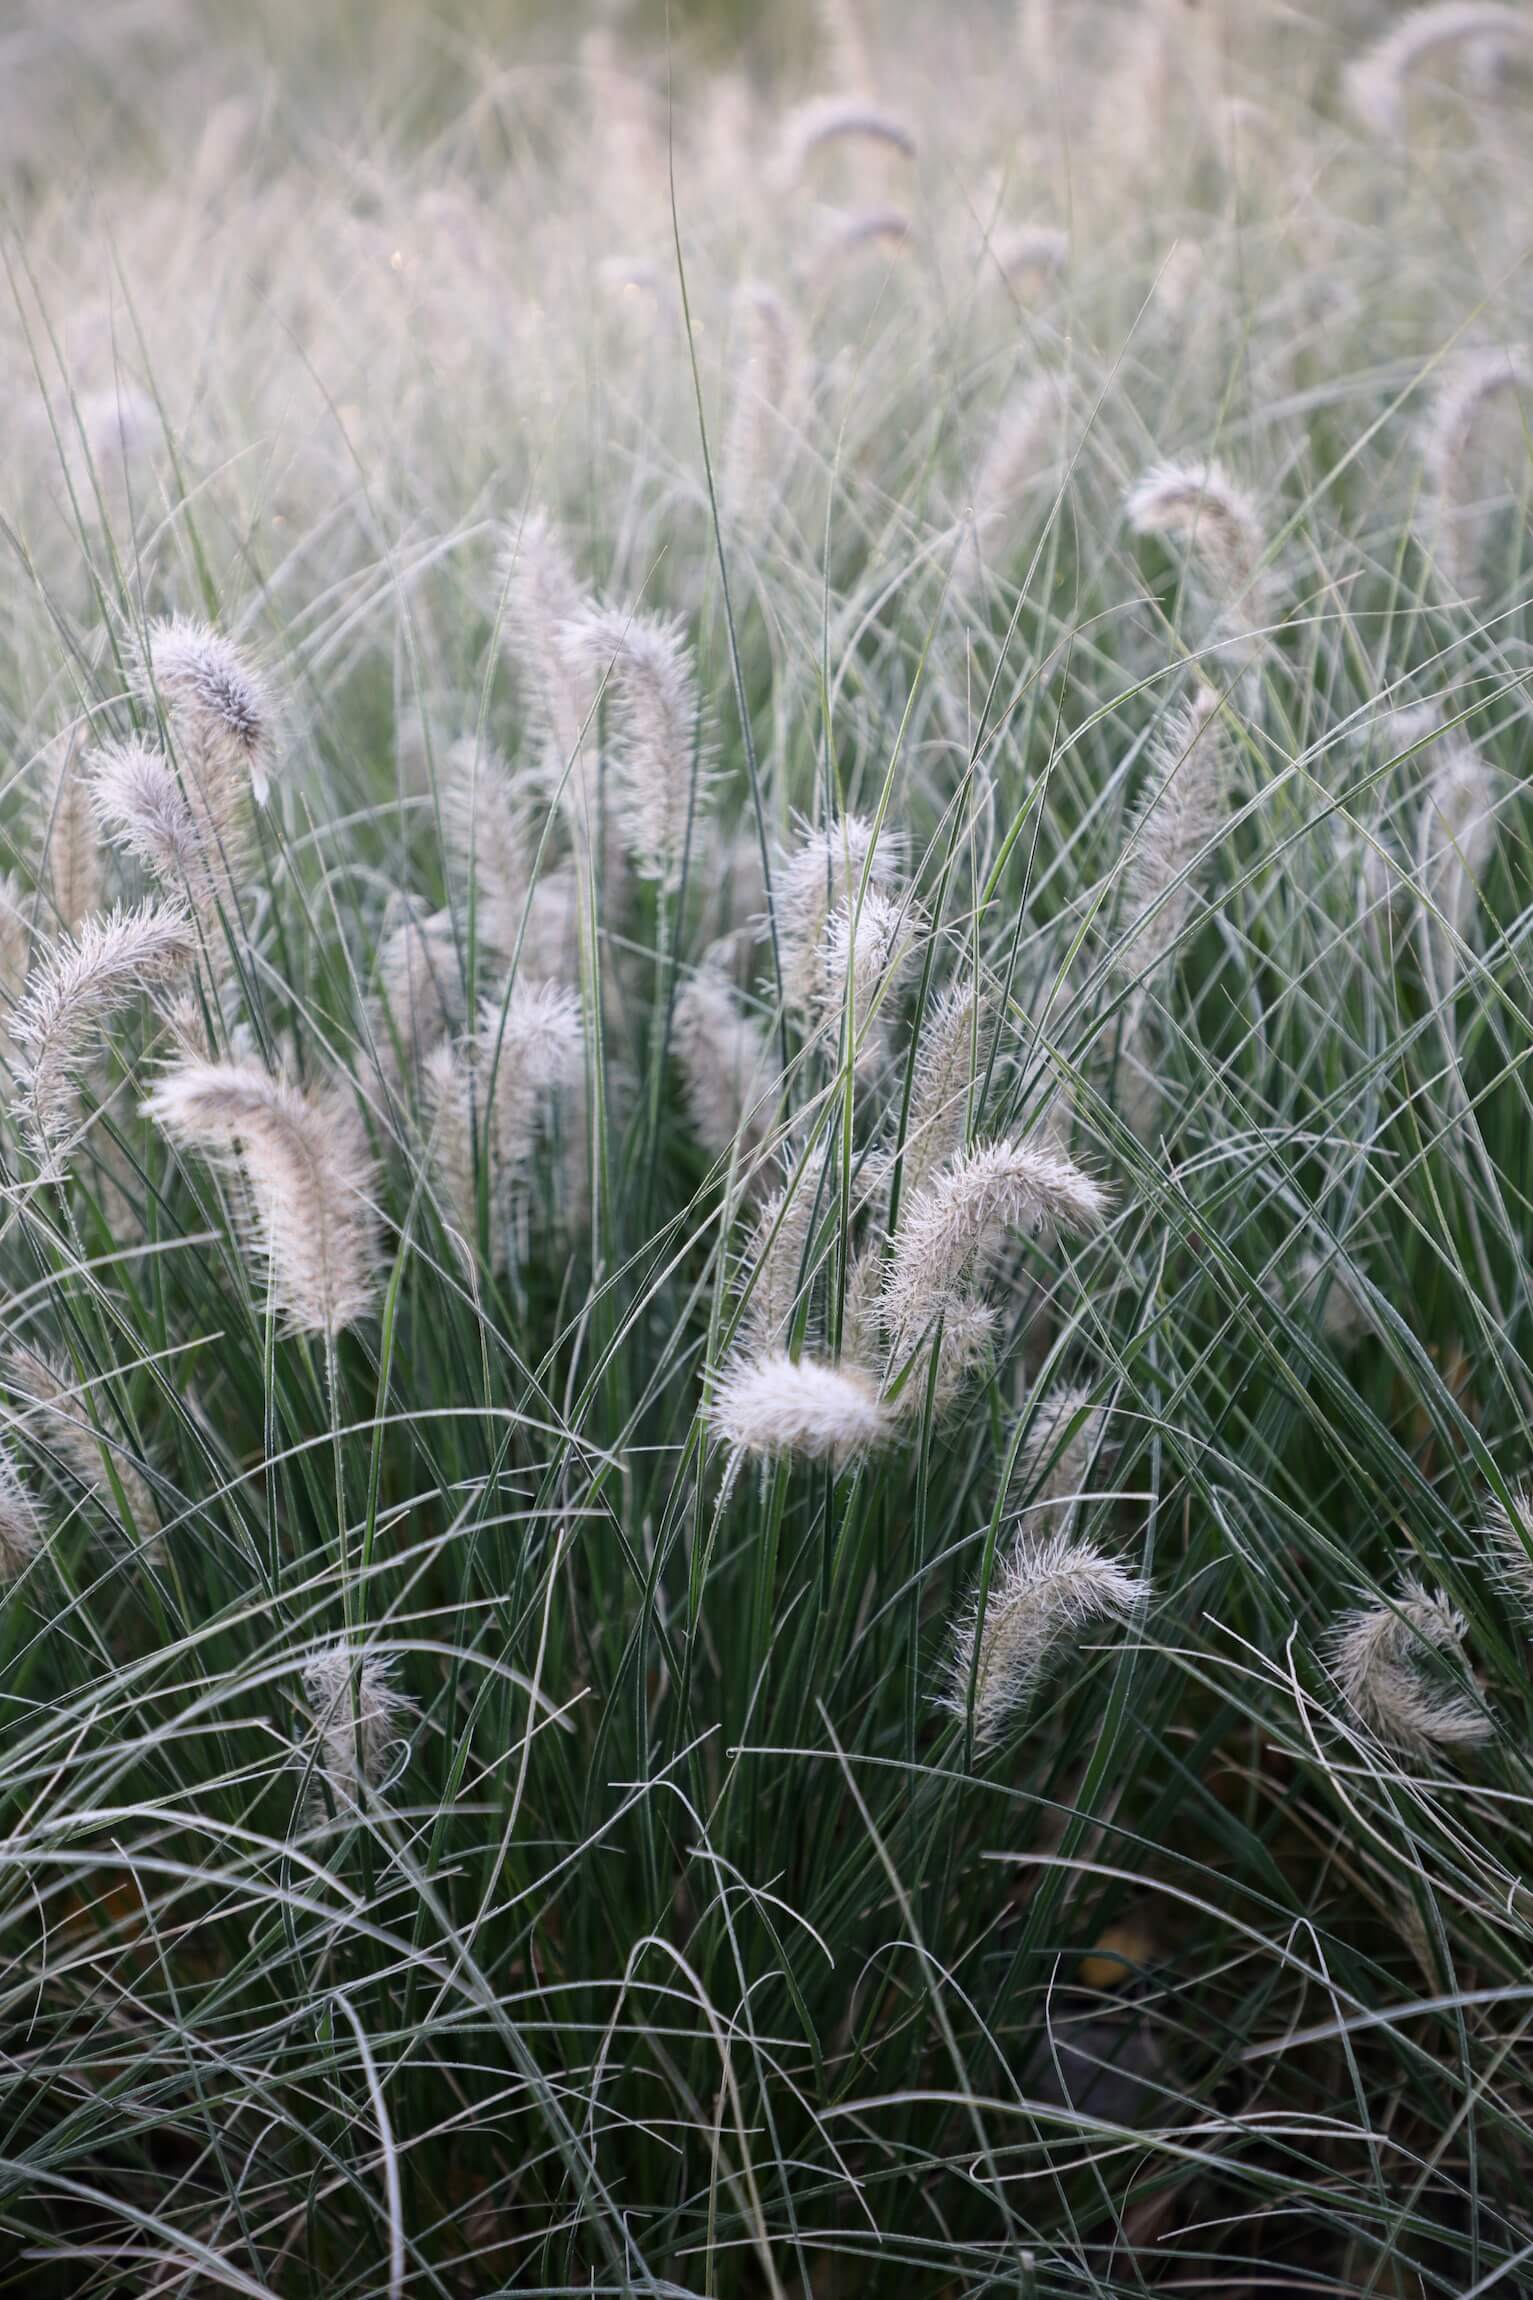 squirrels tail type grass in frost